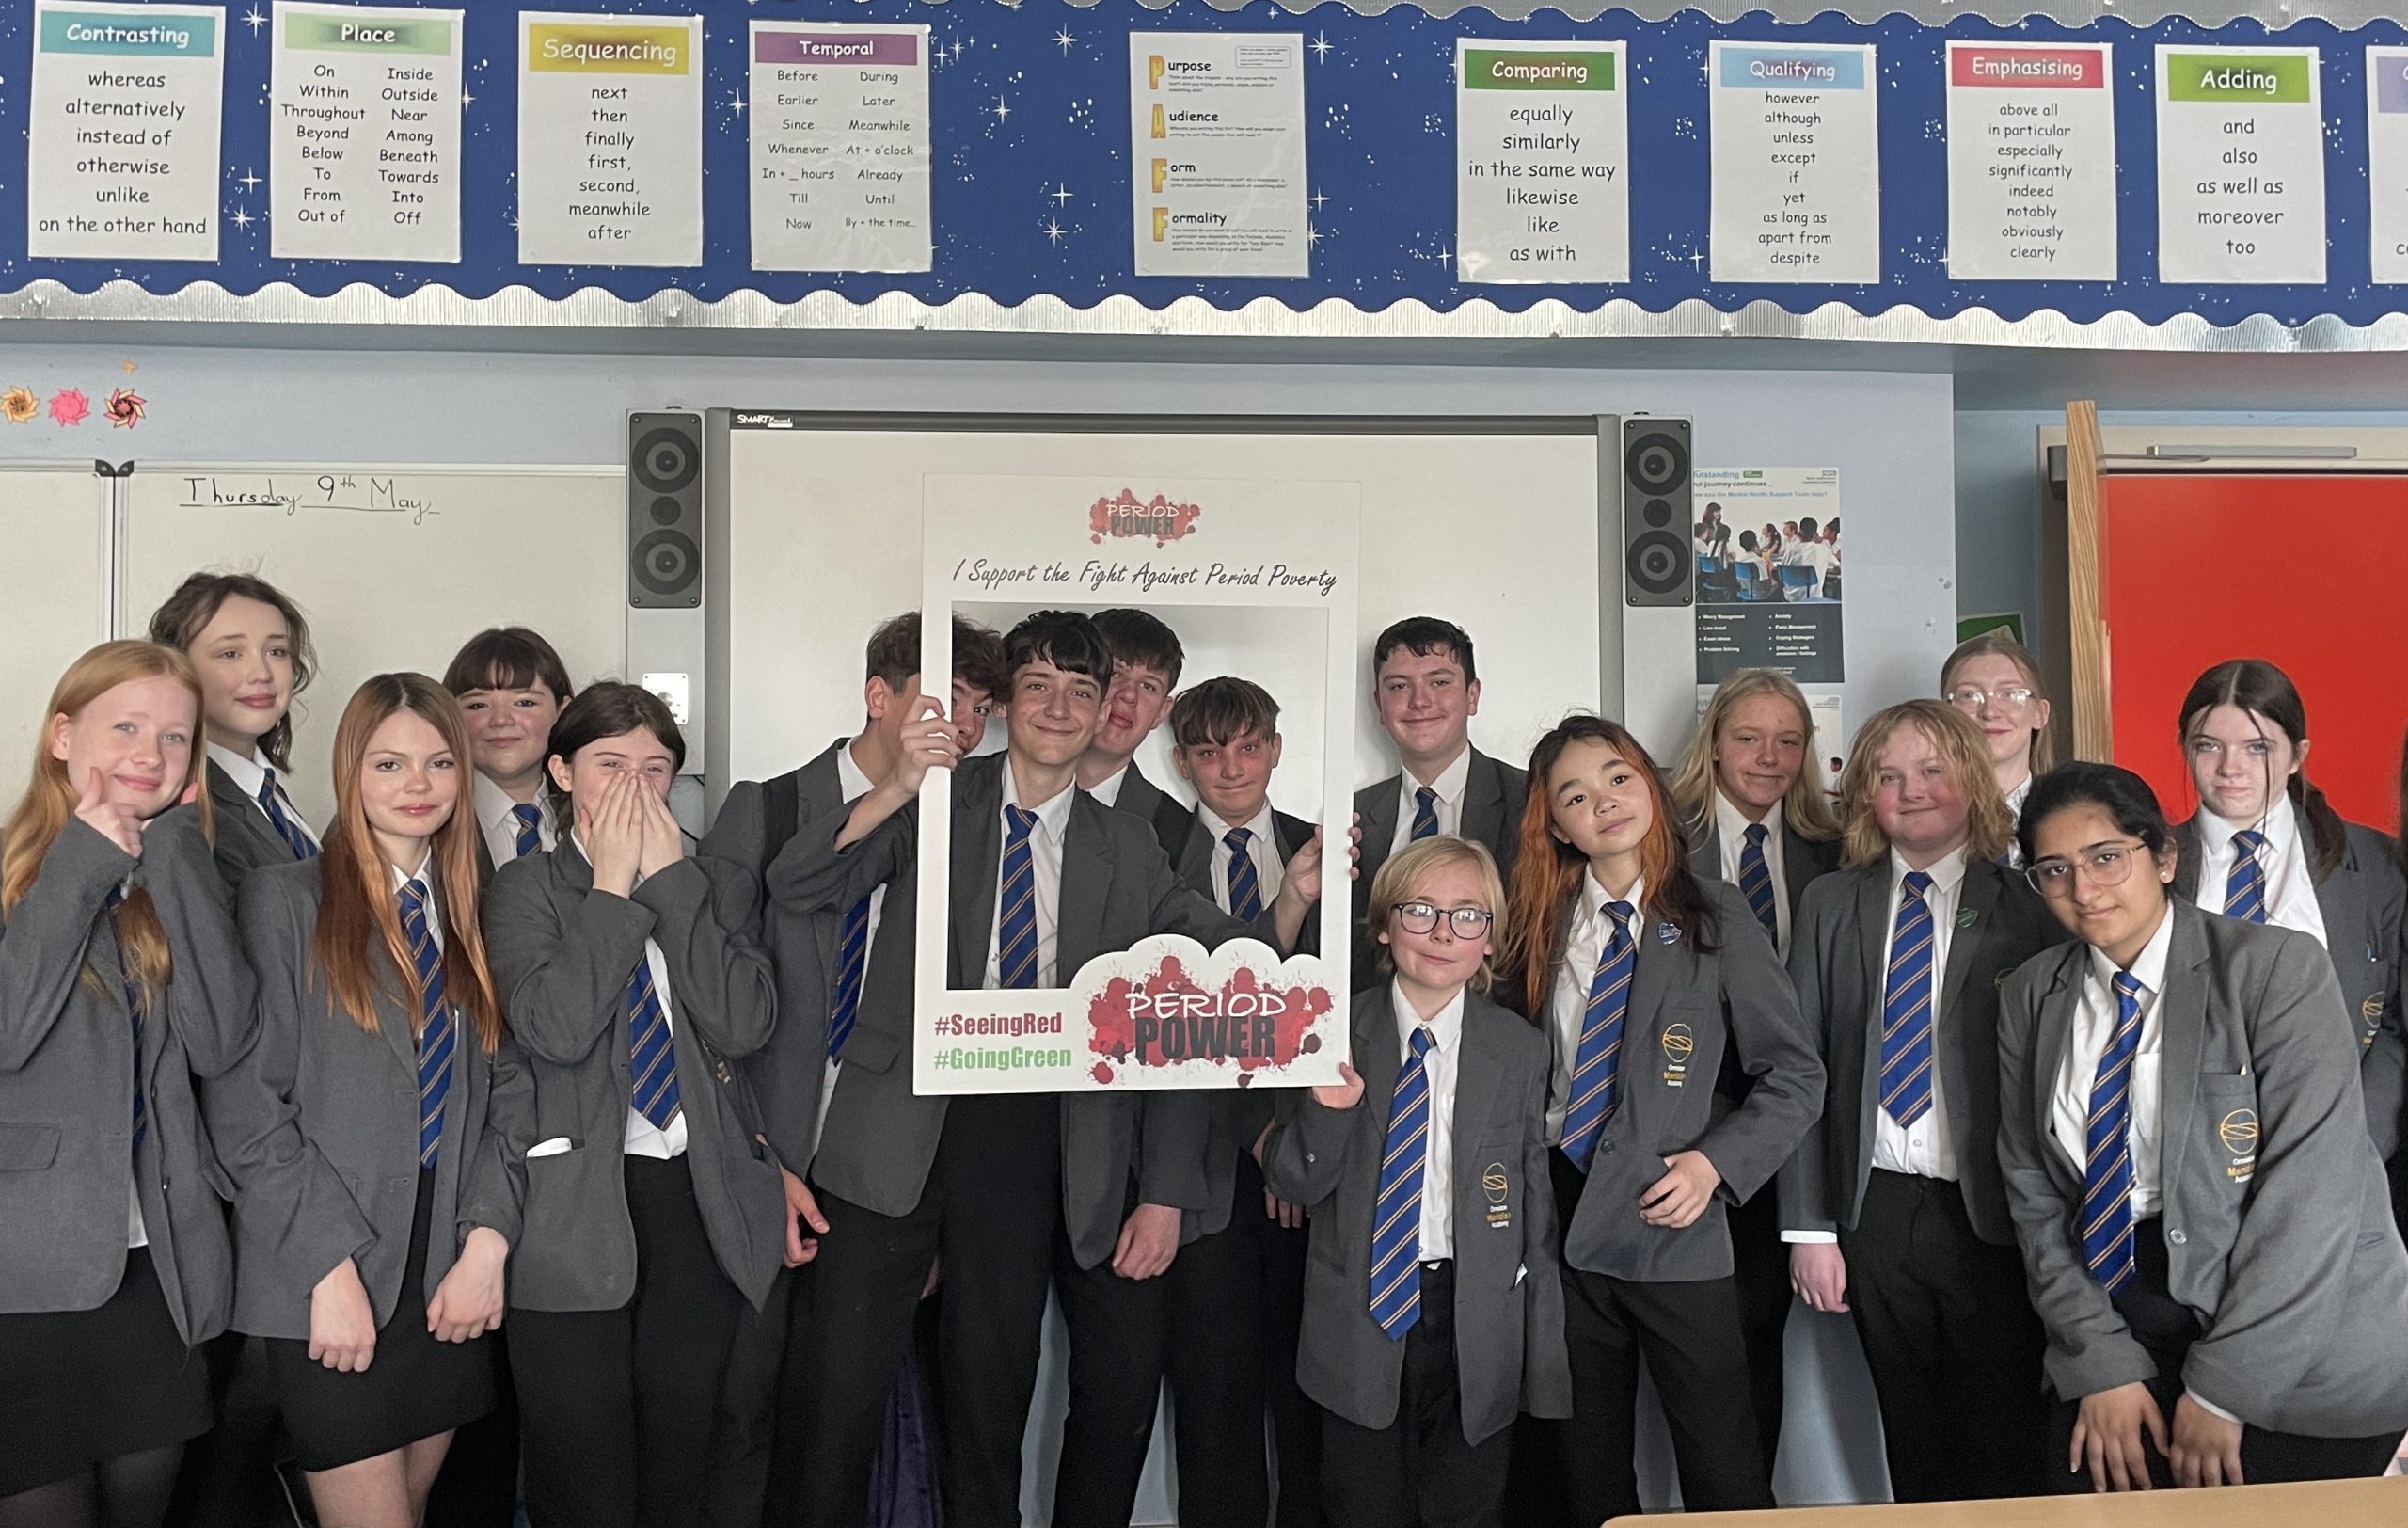 Ormiston Meridian Academy are one of the schools taking part in Seeing Red Going Green